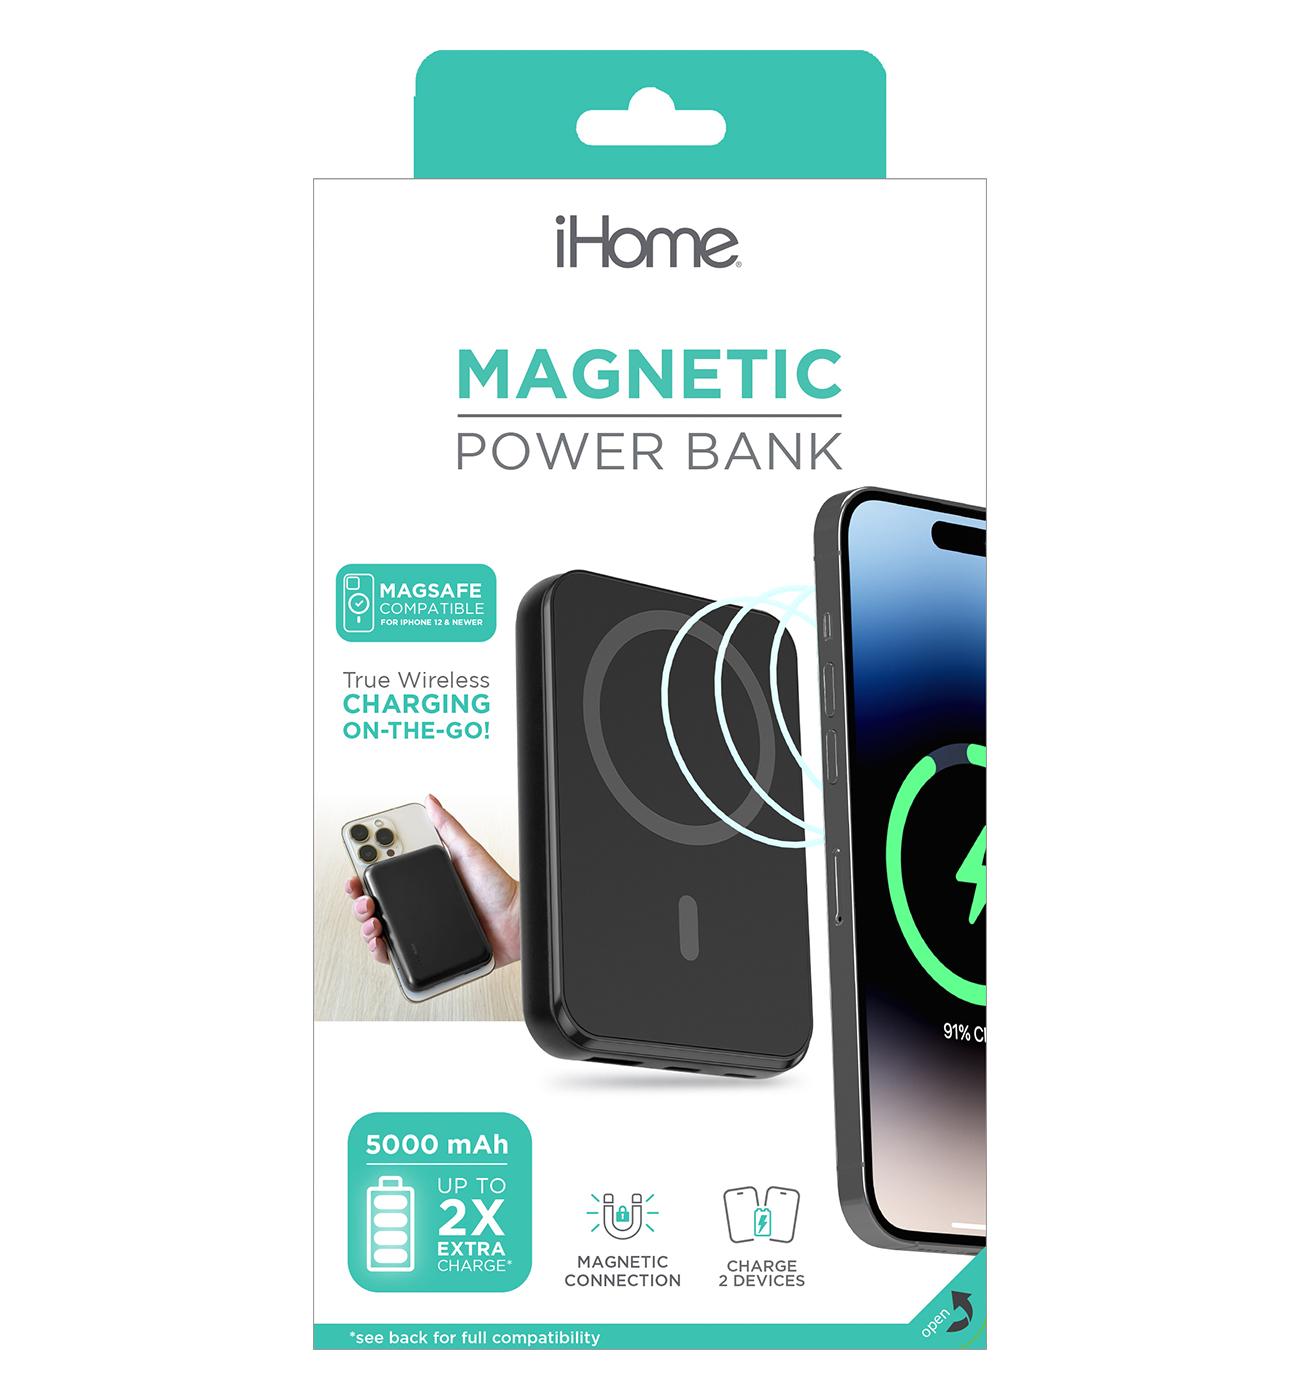 iHome Magnetic Portable Power Bank - Black; image 1 of 2